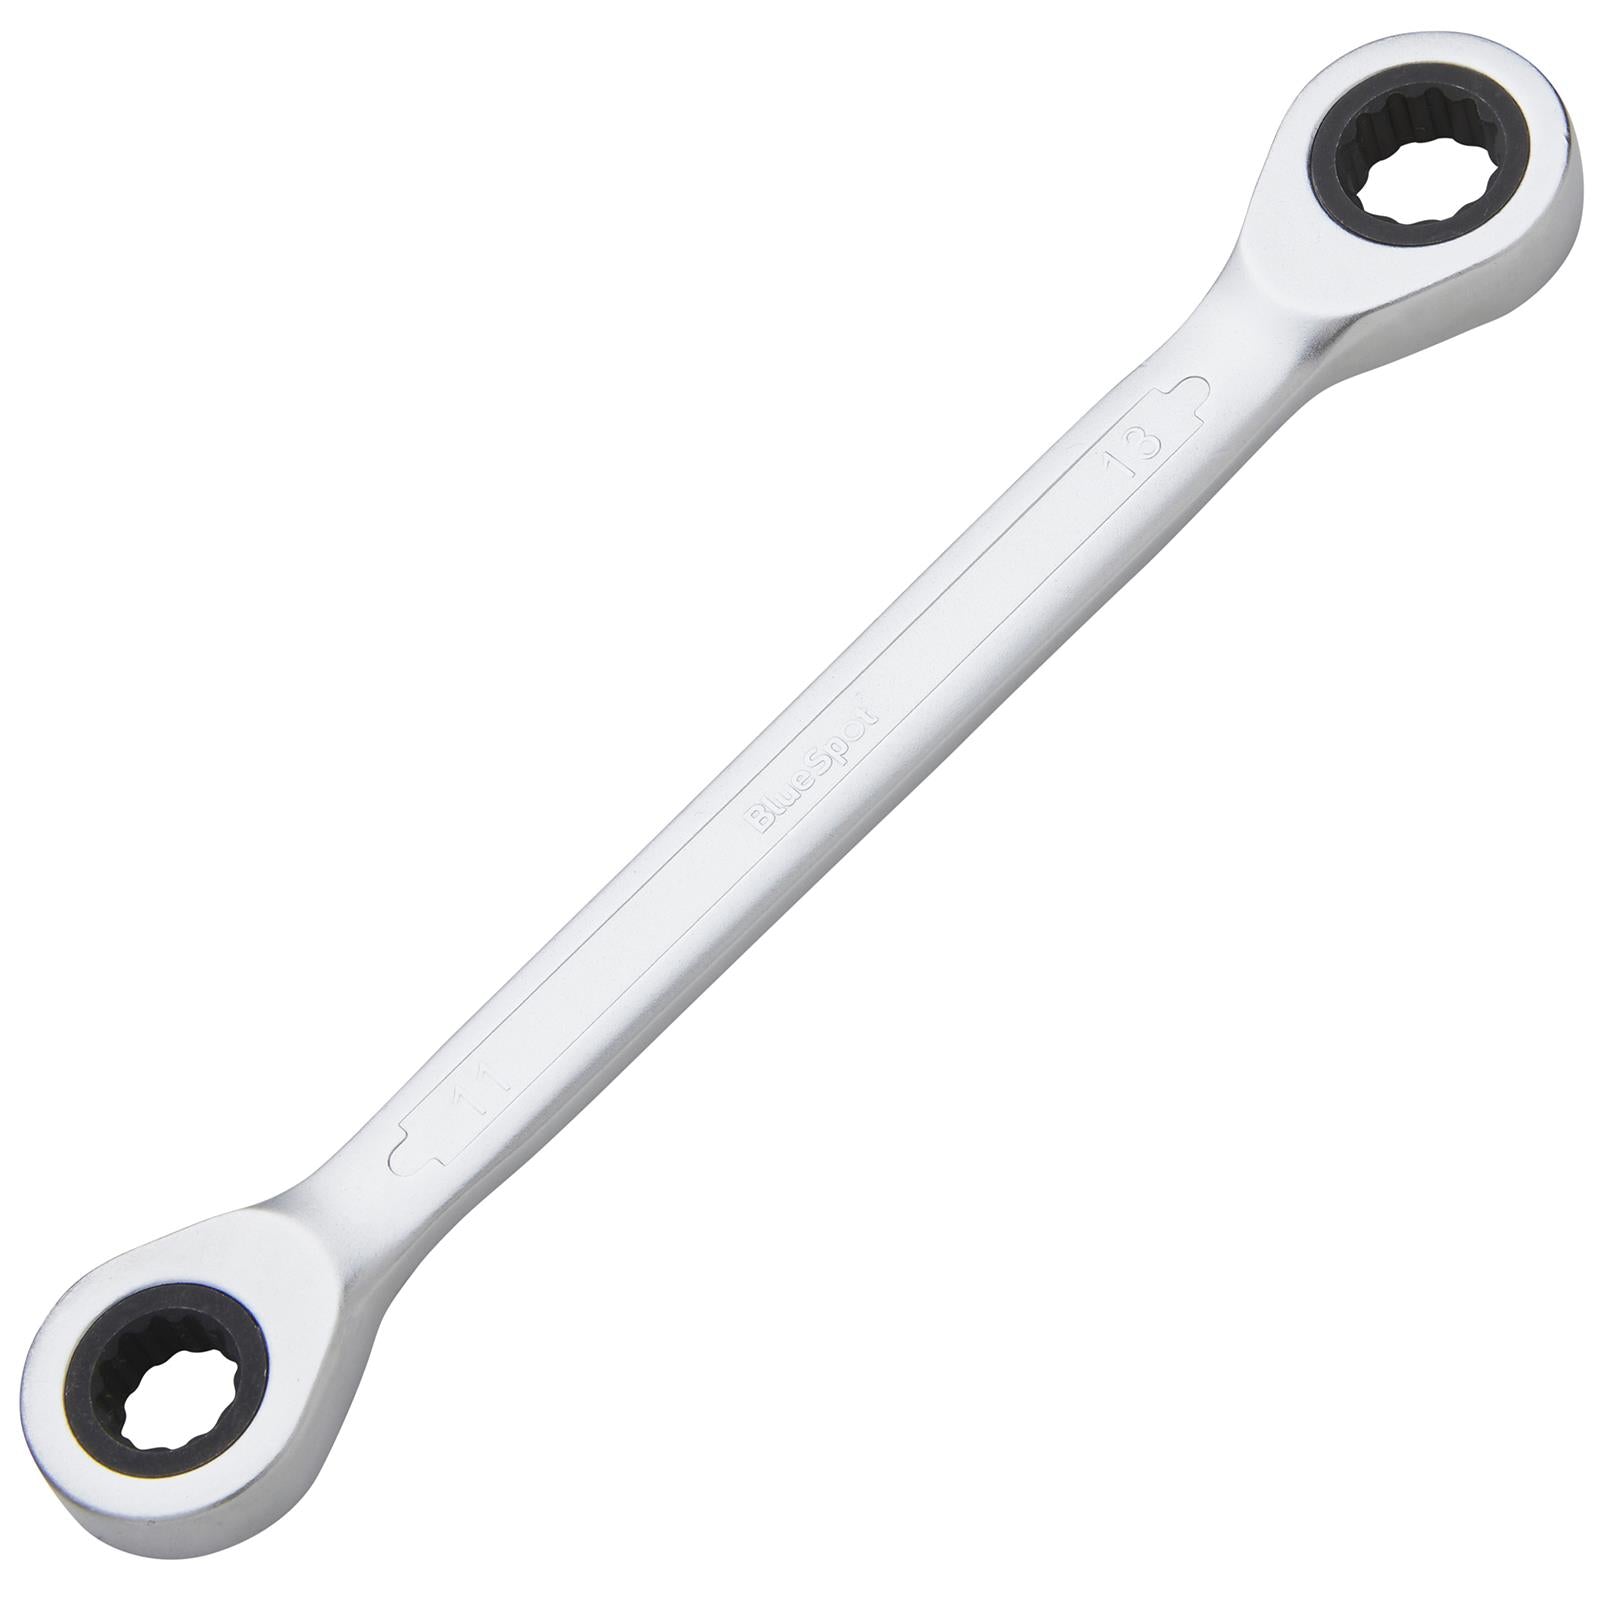 BlueSpot Ratchet Ring Spanner Double End 11mm x 13mm 72 Tooth